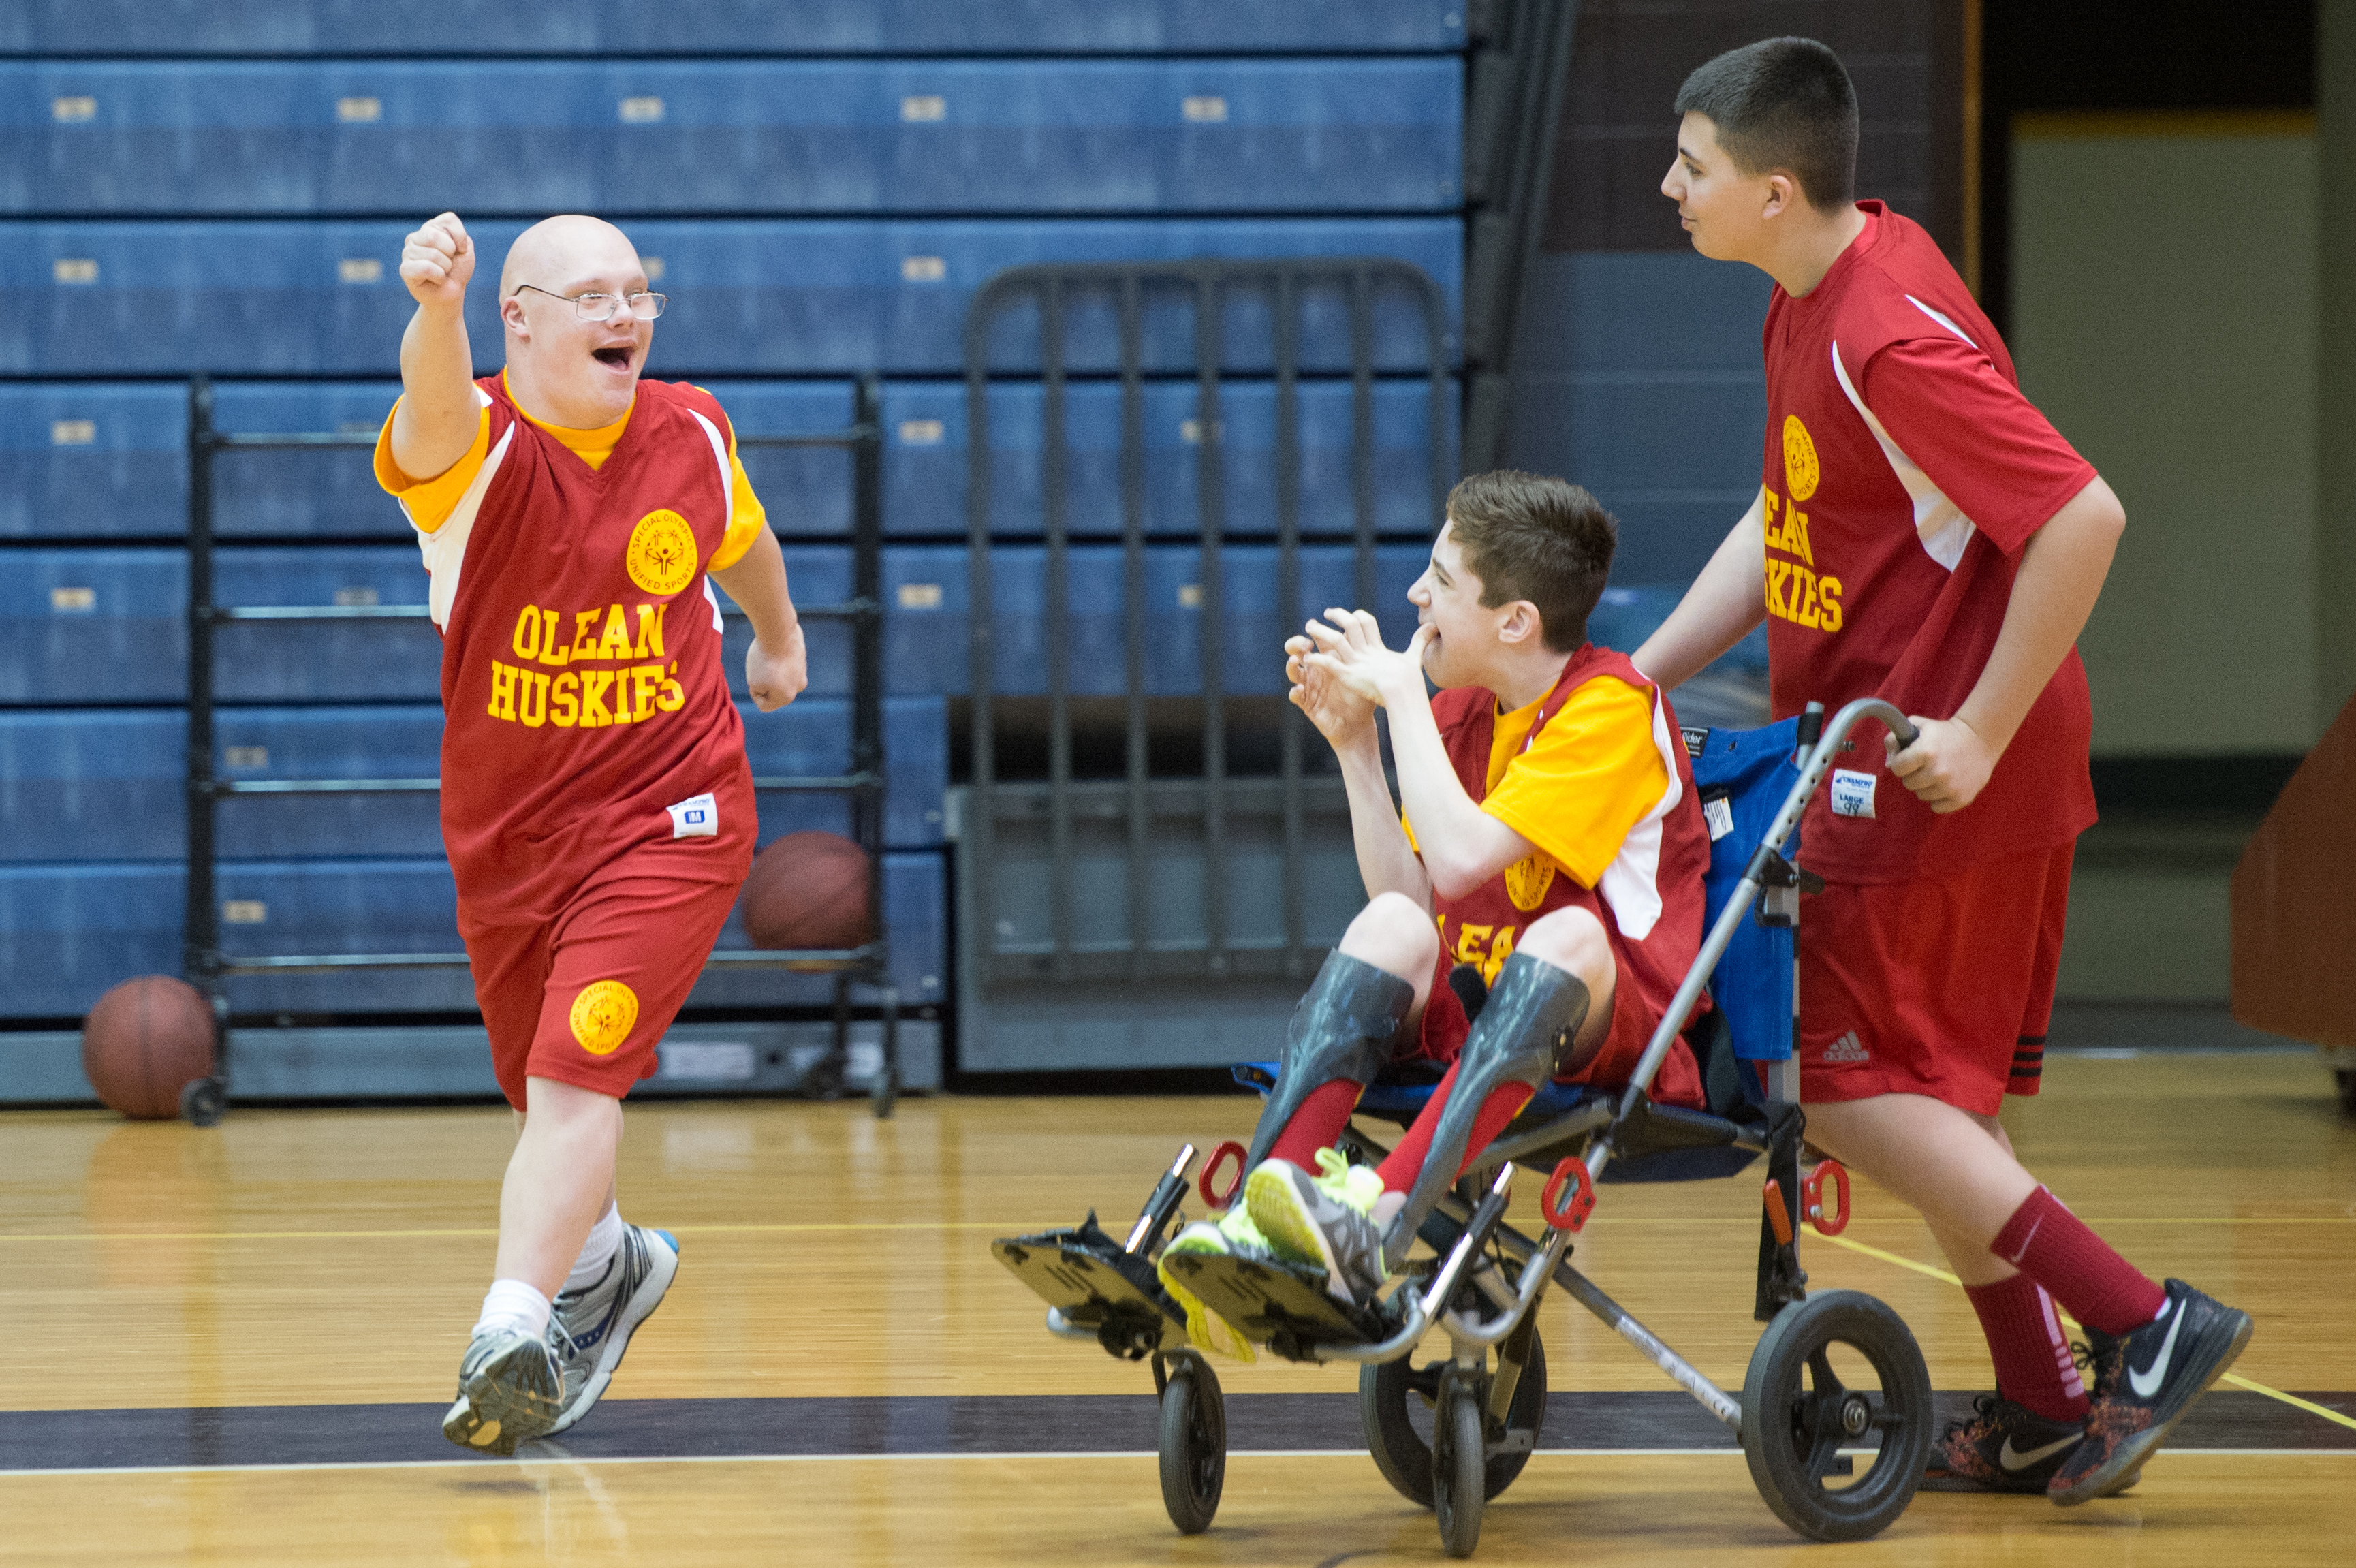 athletes with disabilities cheering on a basketball court